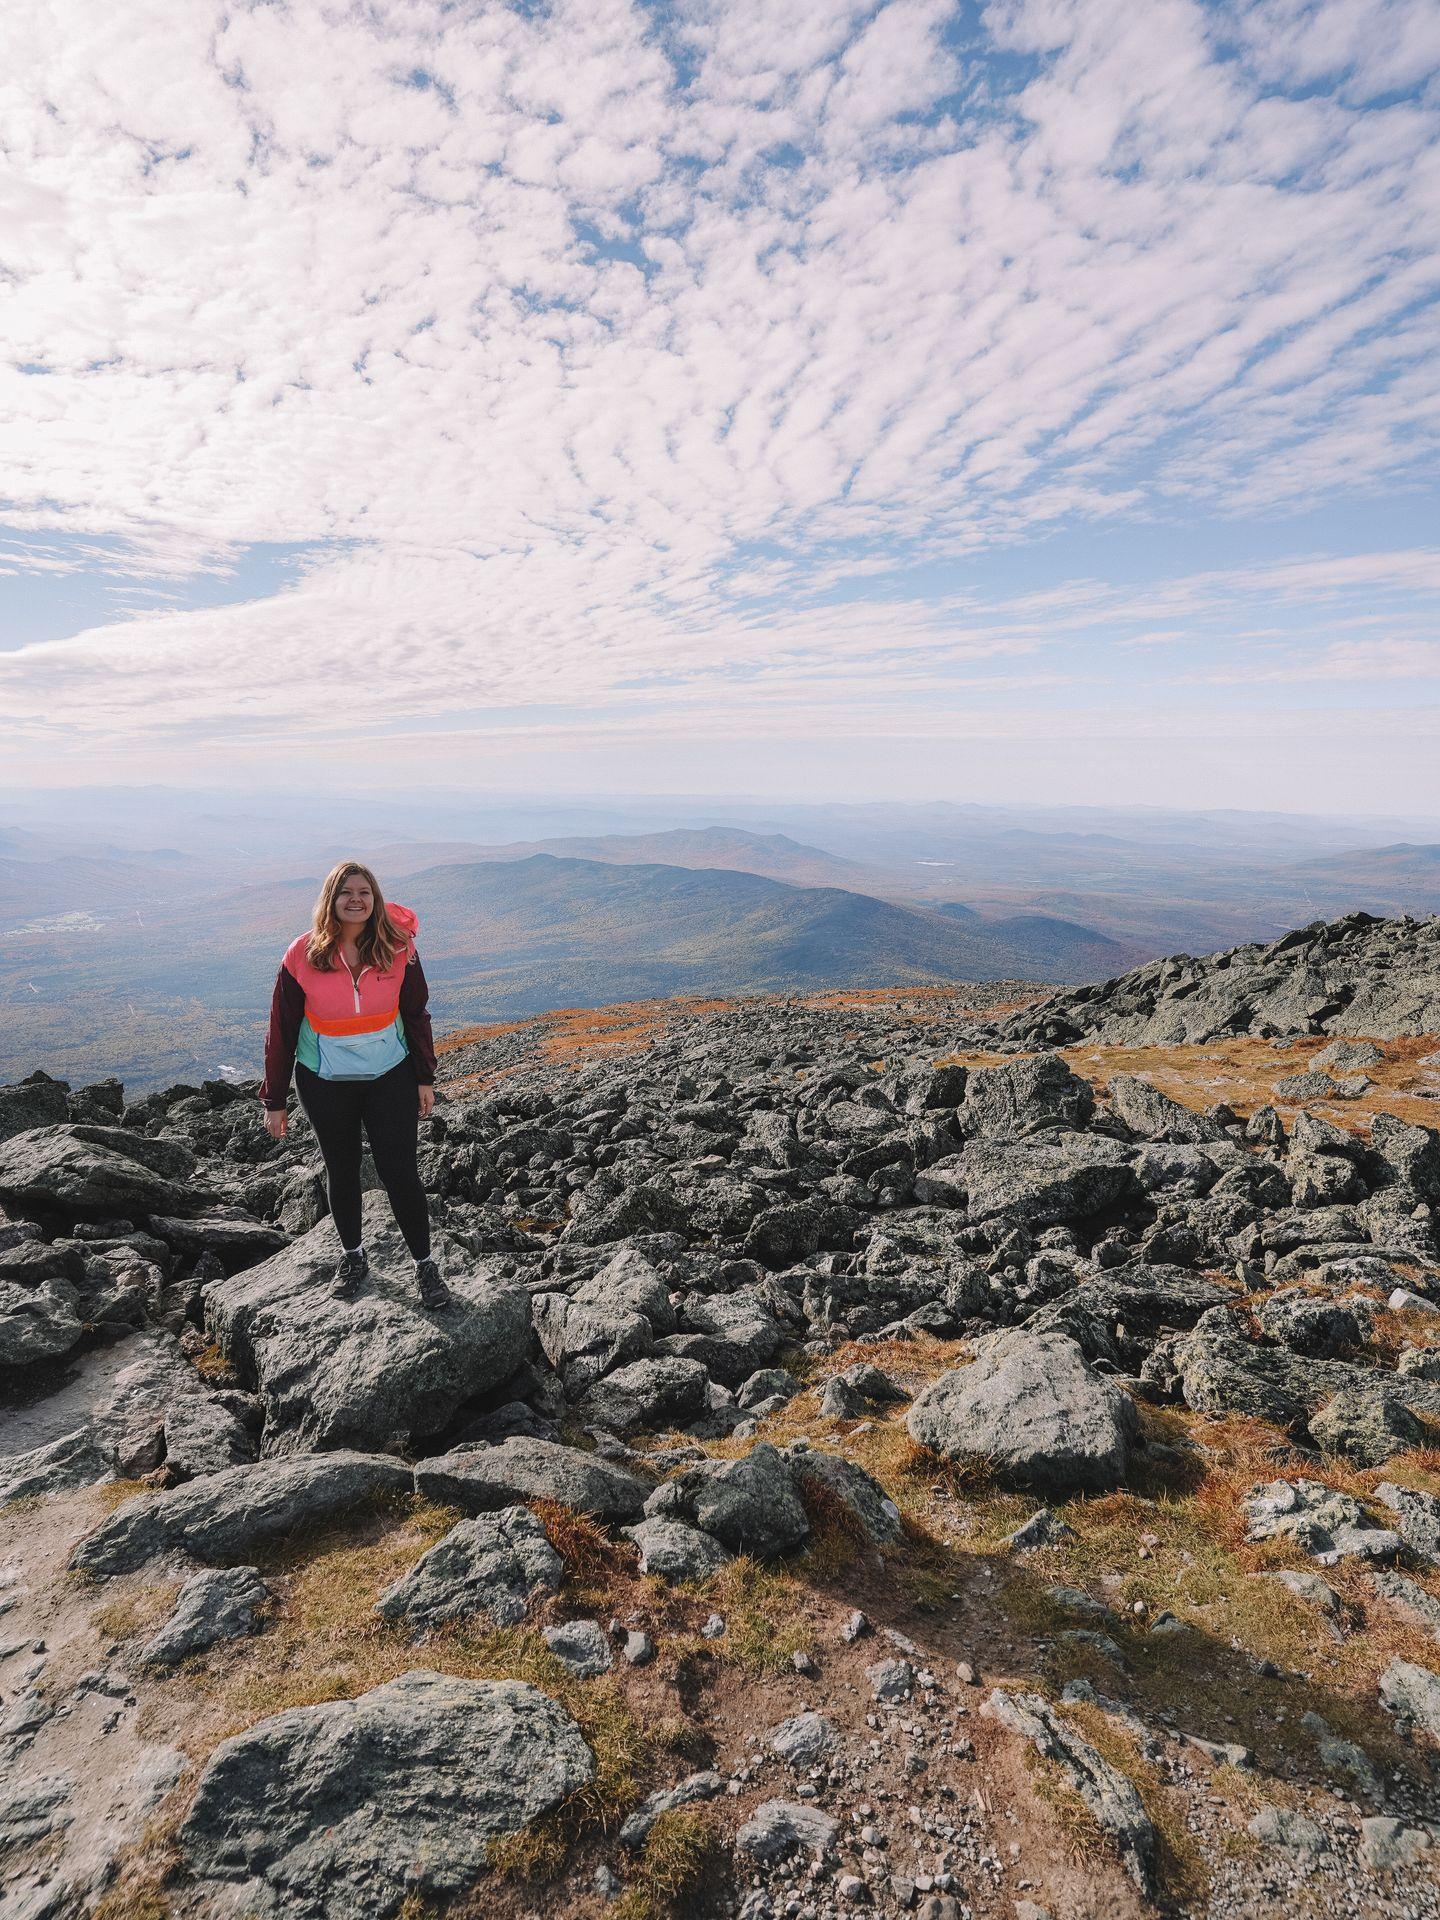 Lydia standing in a rocky area with mountain views in the background.